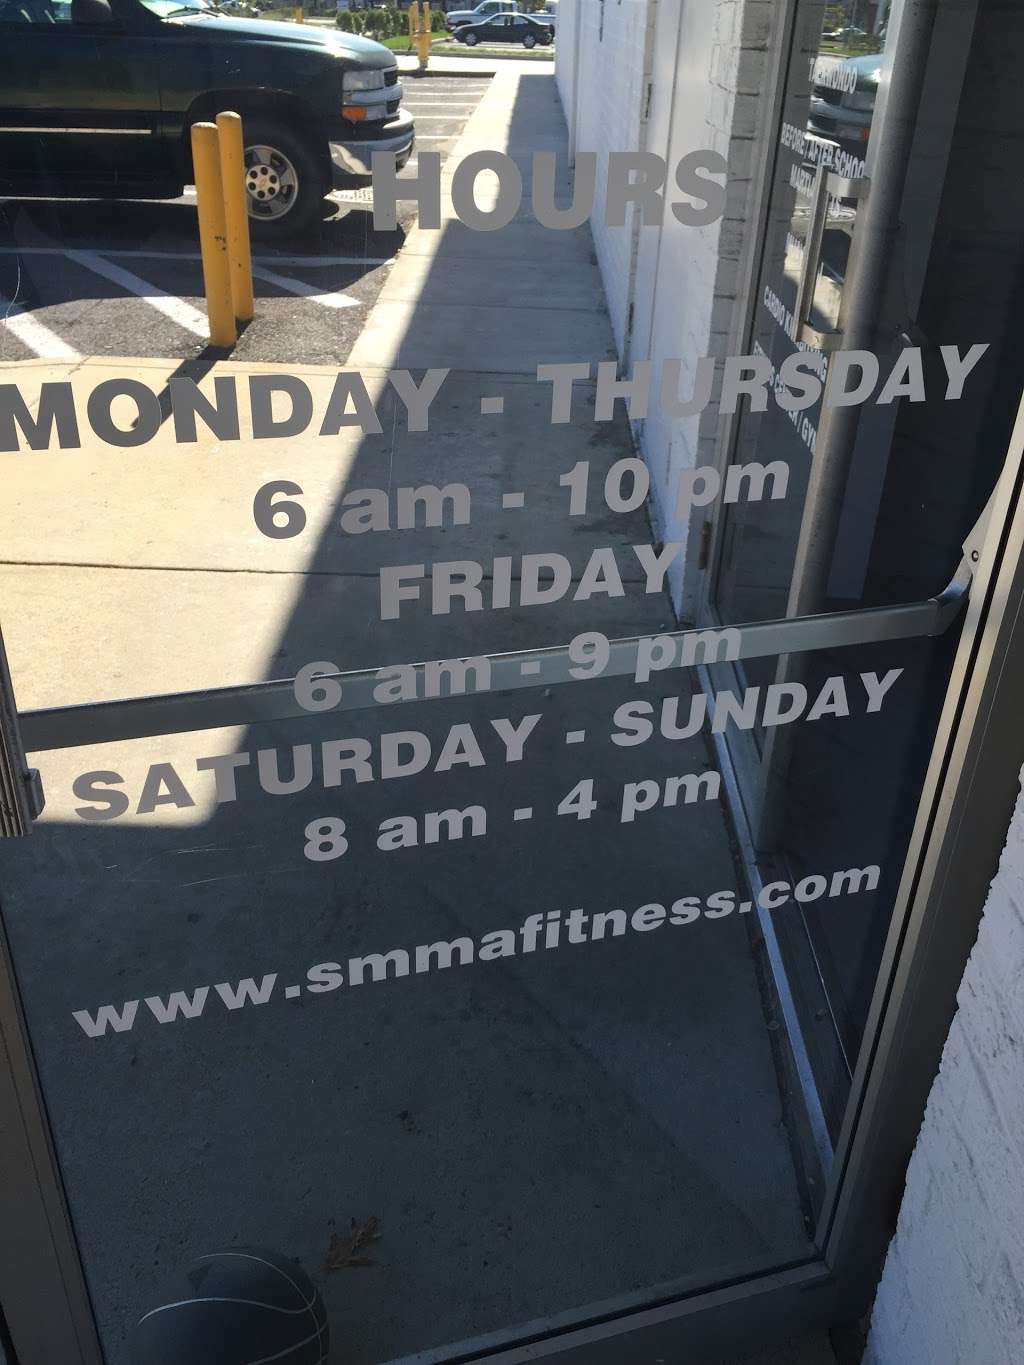 Southern Maryland Martial Arts & Fitness /Southern Maryland Nutr | 3065 Marshall Hall Rd, Bryans Road, MD 20616 | Phone: (301) 375-9409